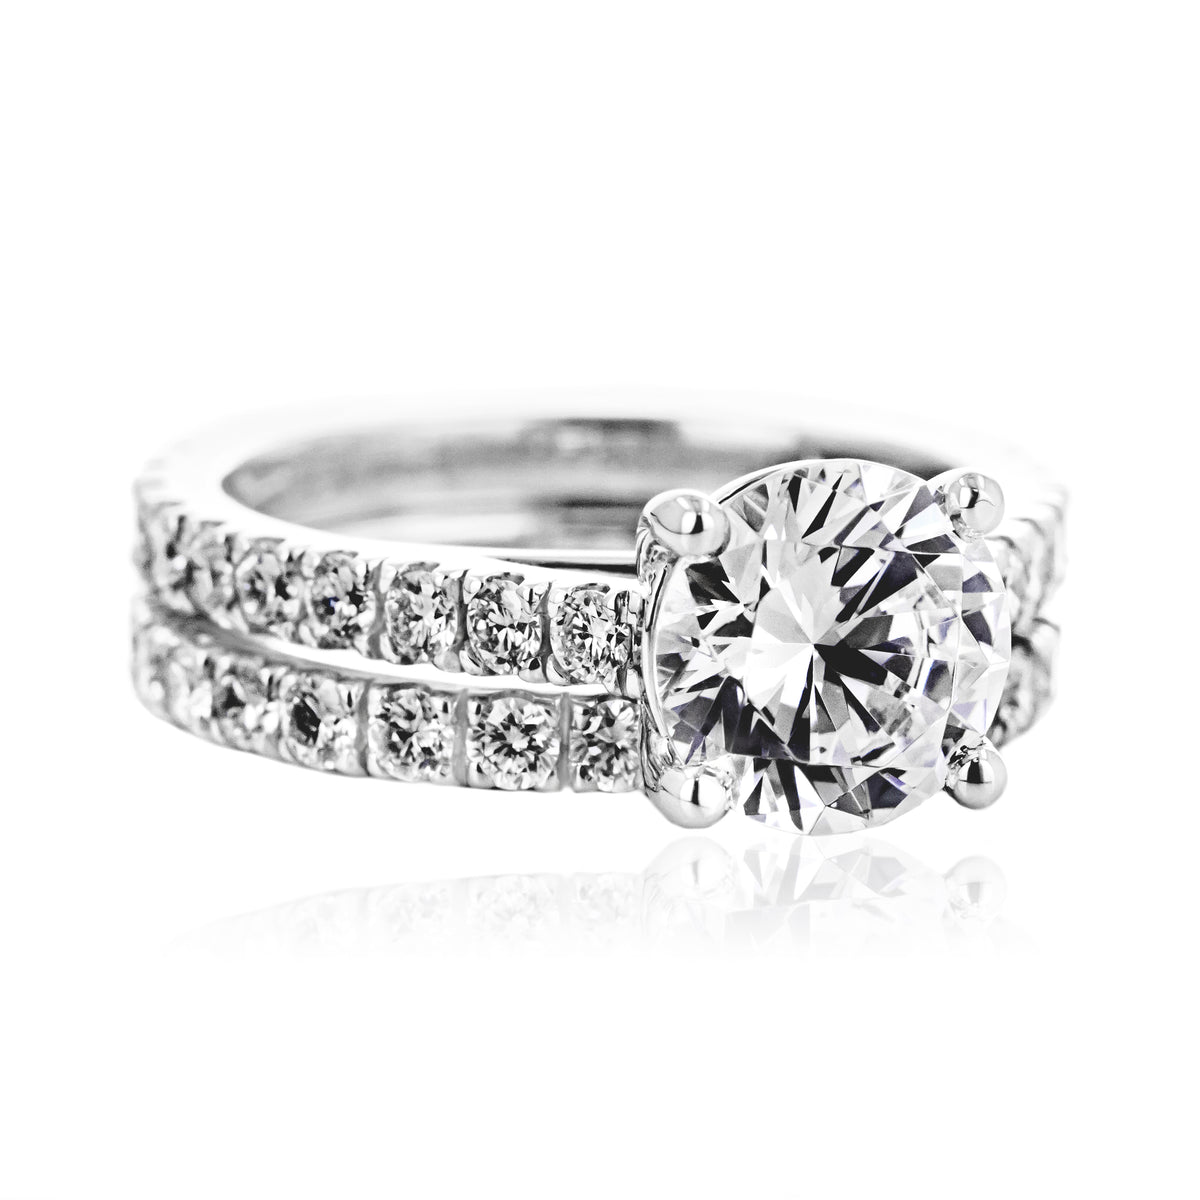 Shown with 1ct Round Cut Lab Grown Diamond in 14k White Gold with Matching Wedding Band